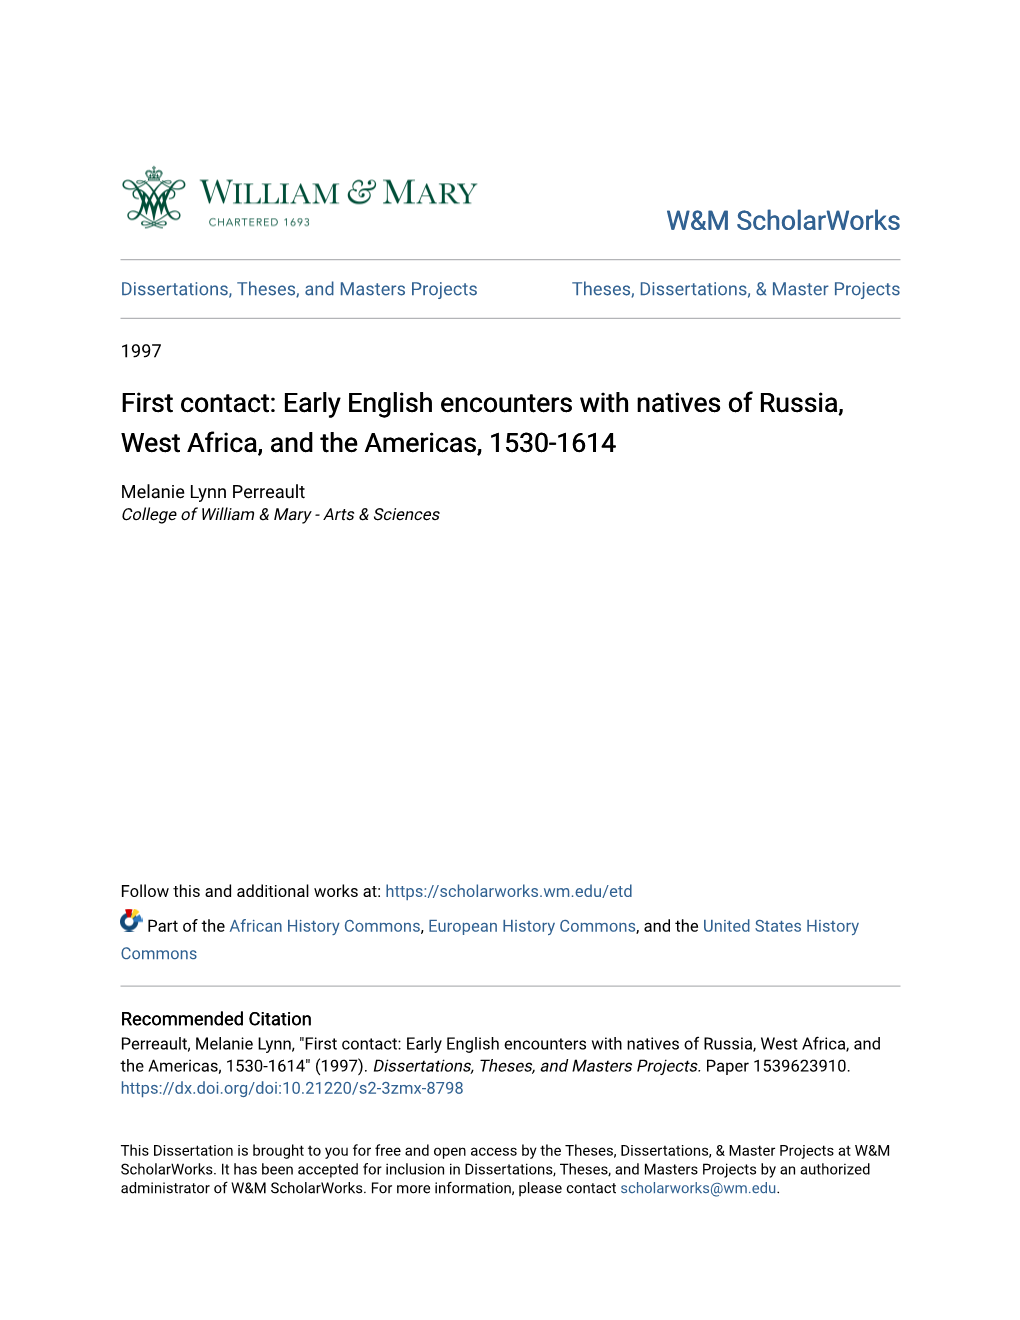 First Contact: Early English Encounters with Natives of Russia, West Africa, and the Americas, 1530-1614